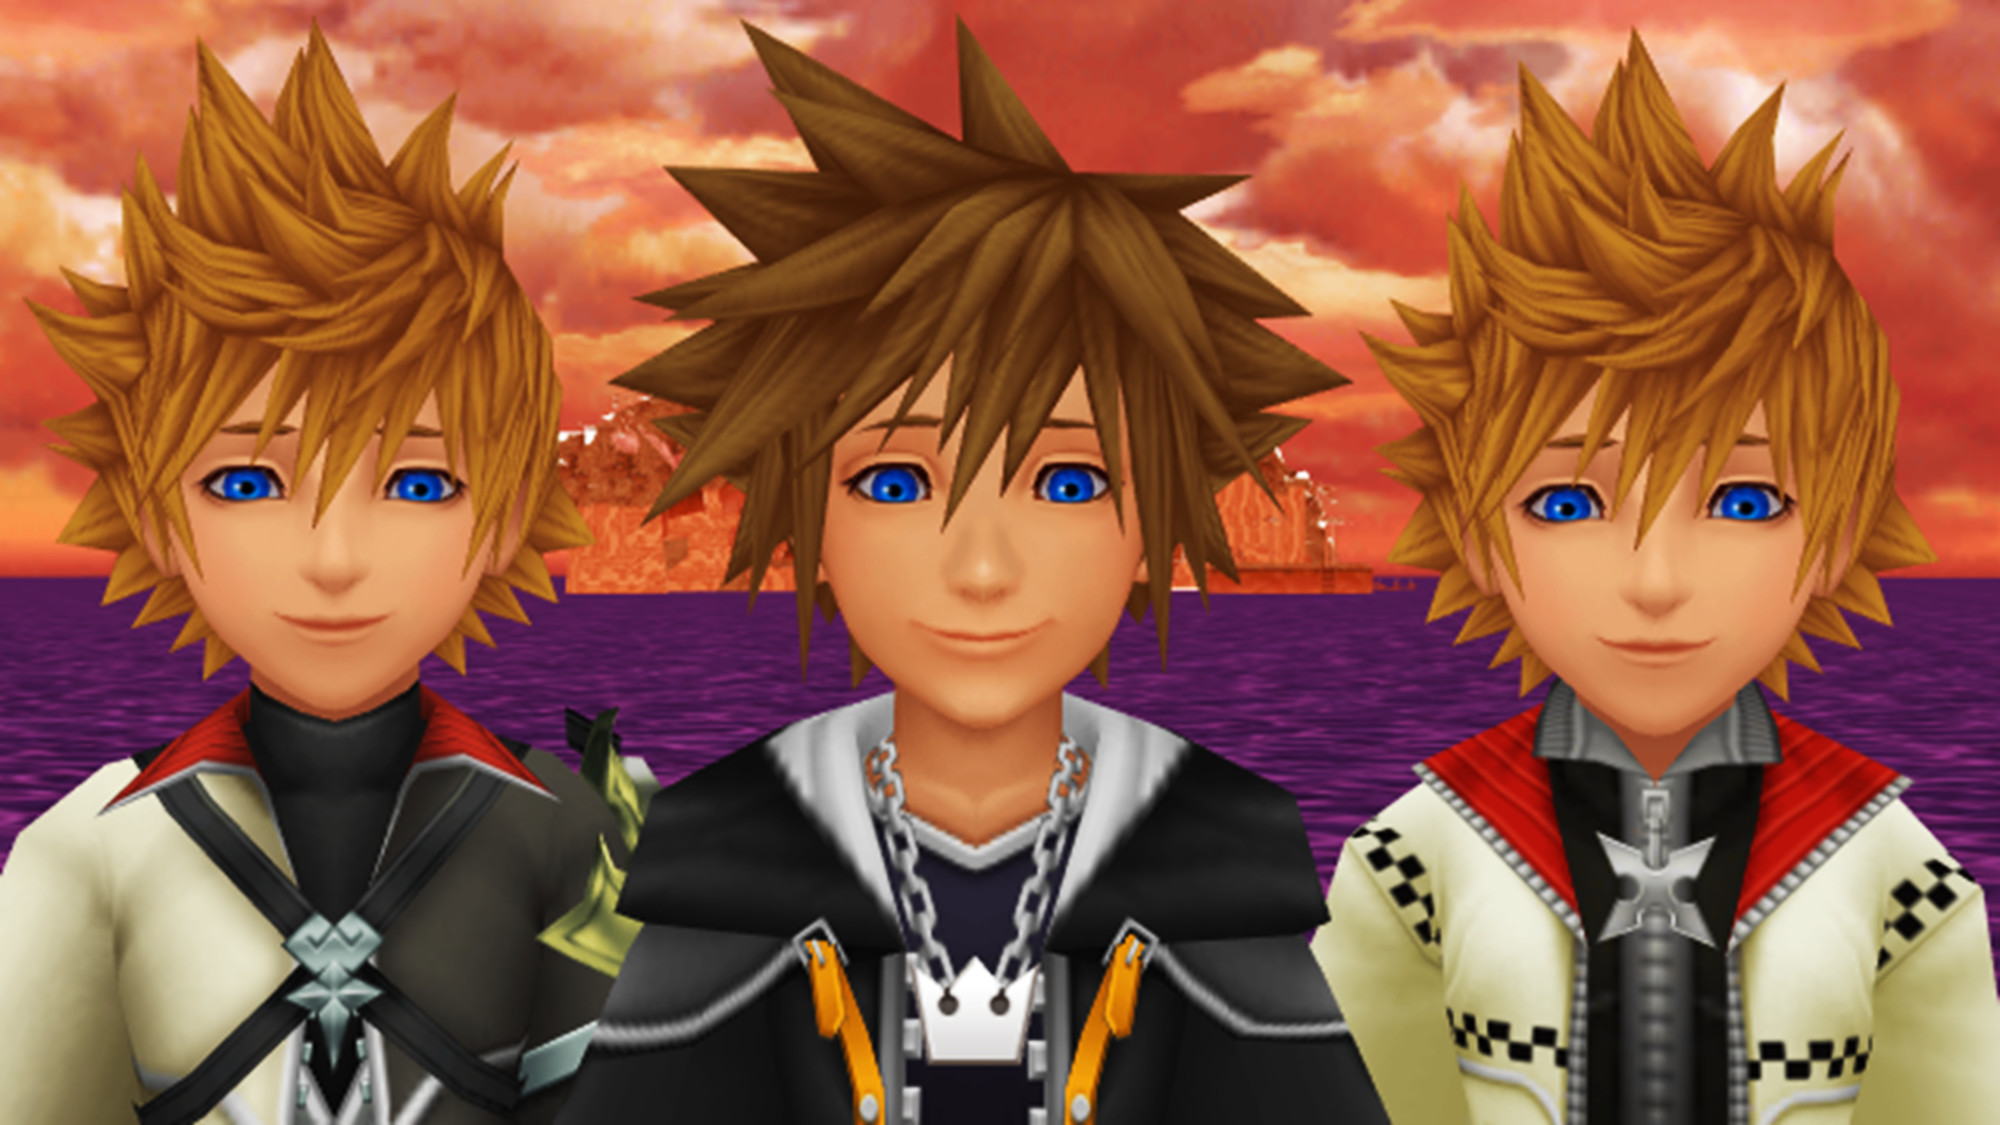 2000x1125 The Boys of Kingdom Hearts images Sora Roxas and Ventus are Cool Dudes. HD  wallpaper and background photos